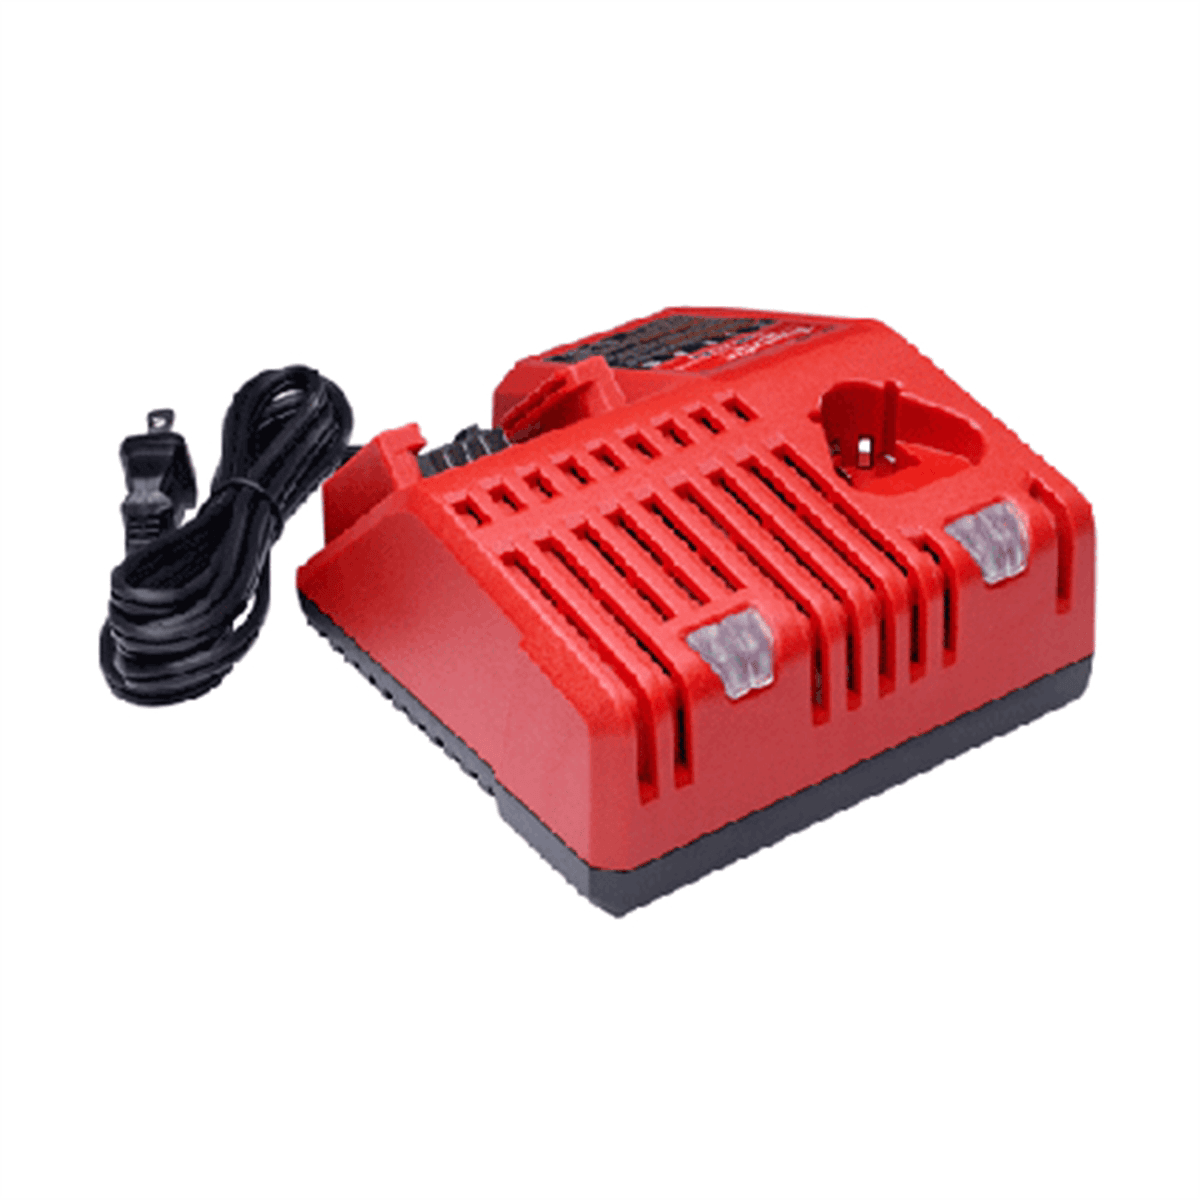 M18/M12 MULTIVAGE BATT CHARGER ONLY (BATT NOT INCLUDED)